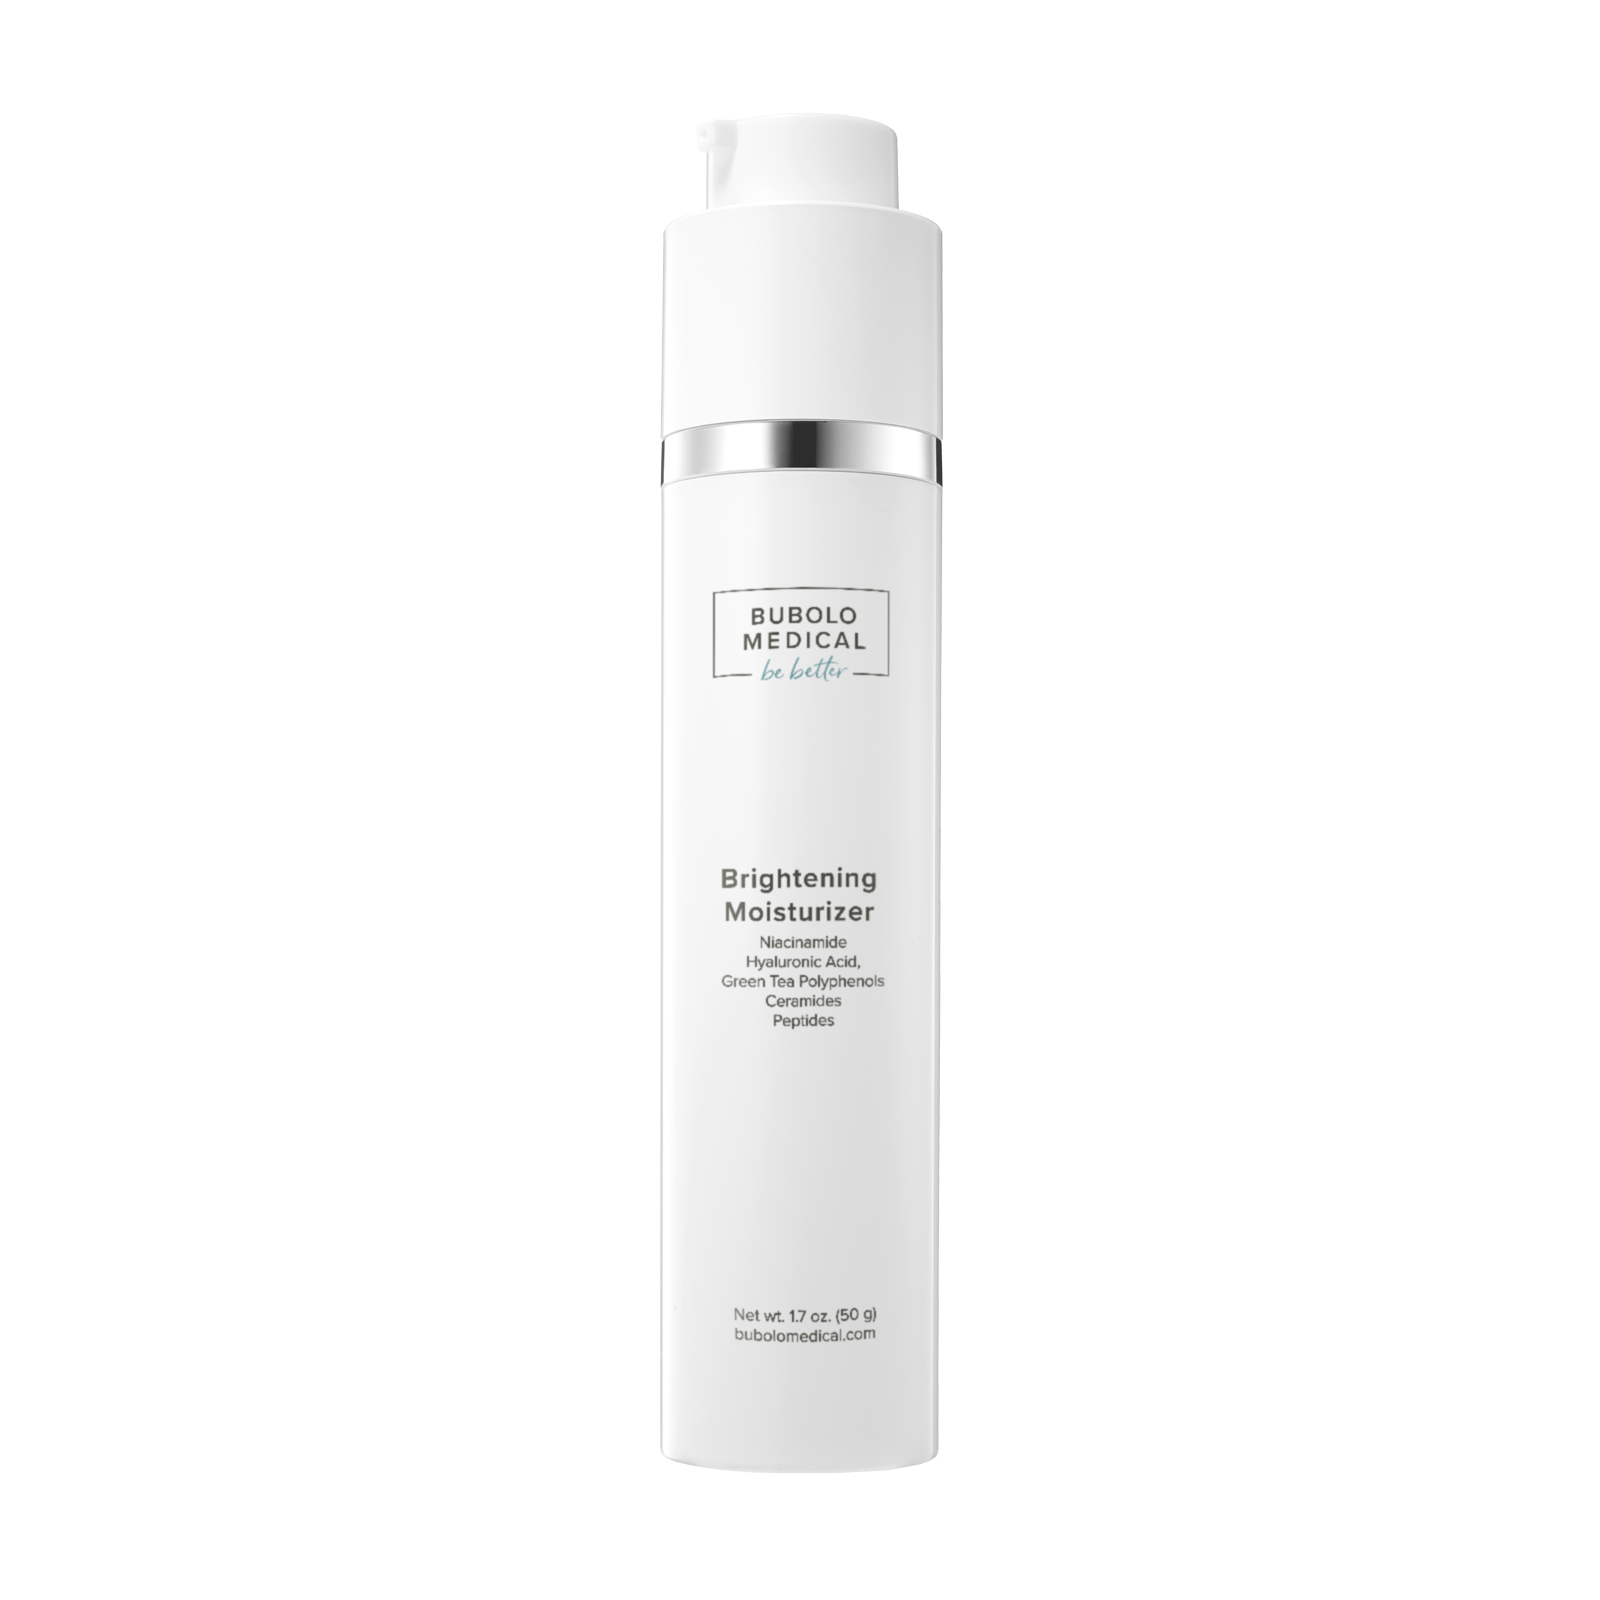 brightening moisturizer with niacinamide and hyaluronic acid for hydration and anti-aging care